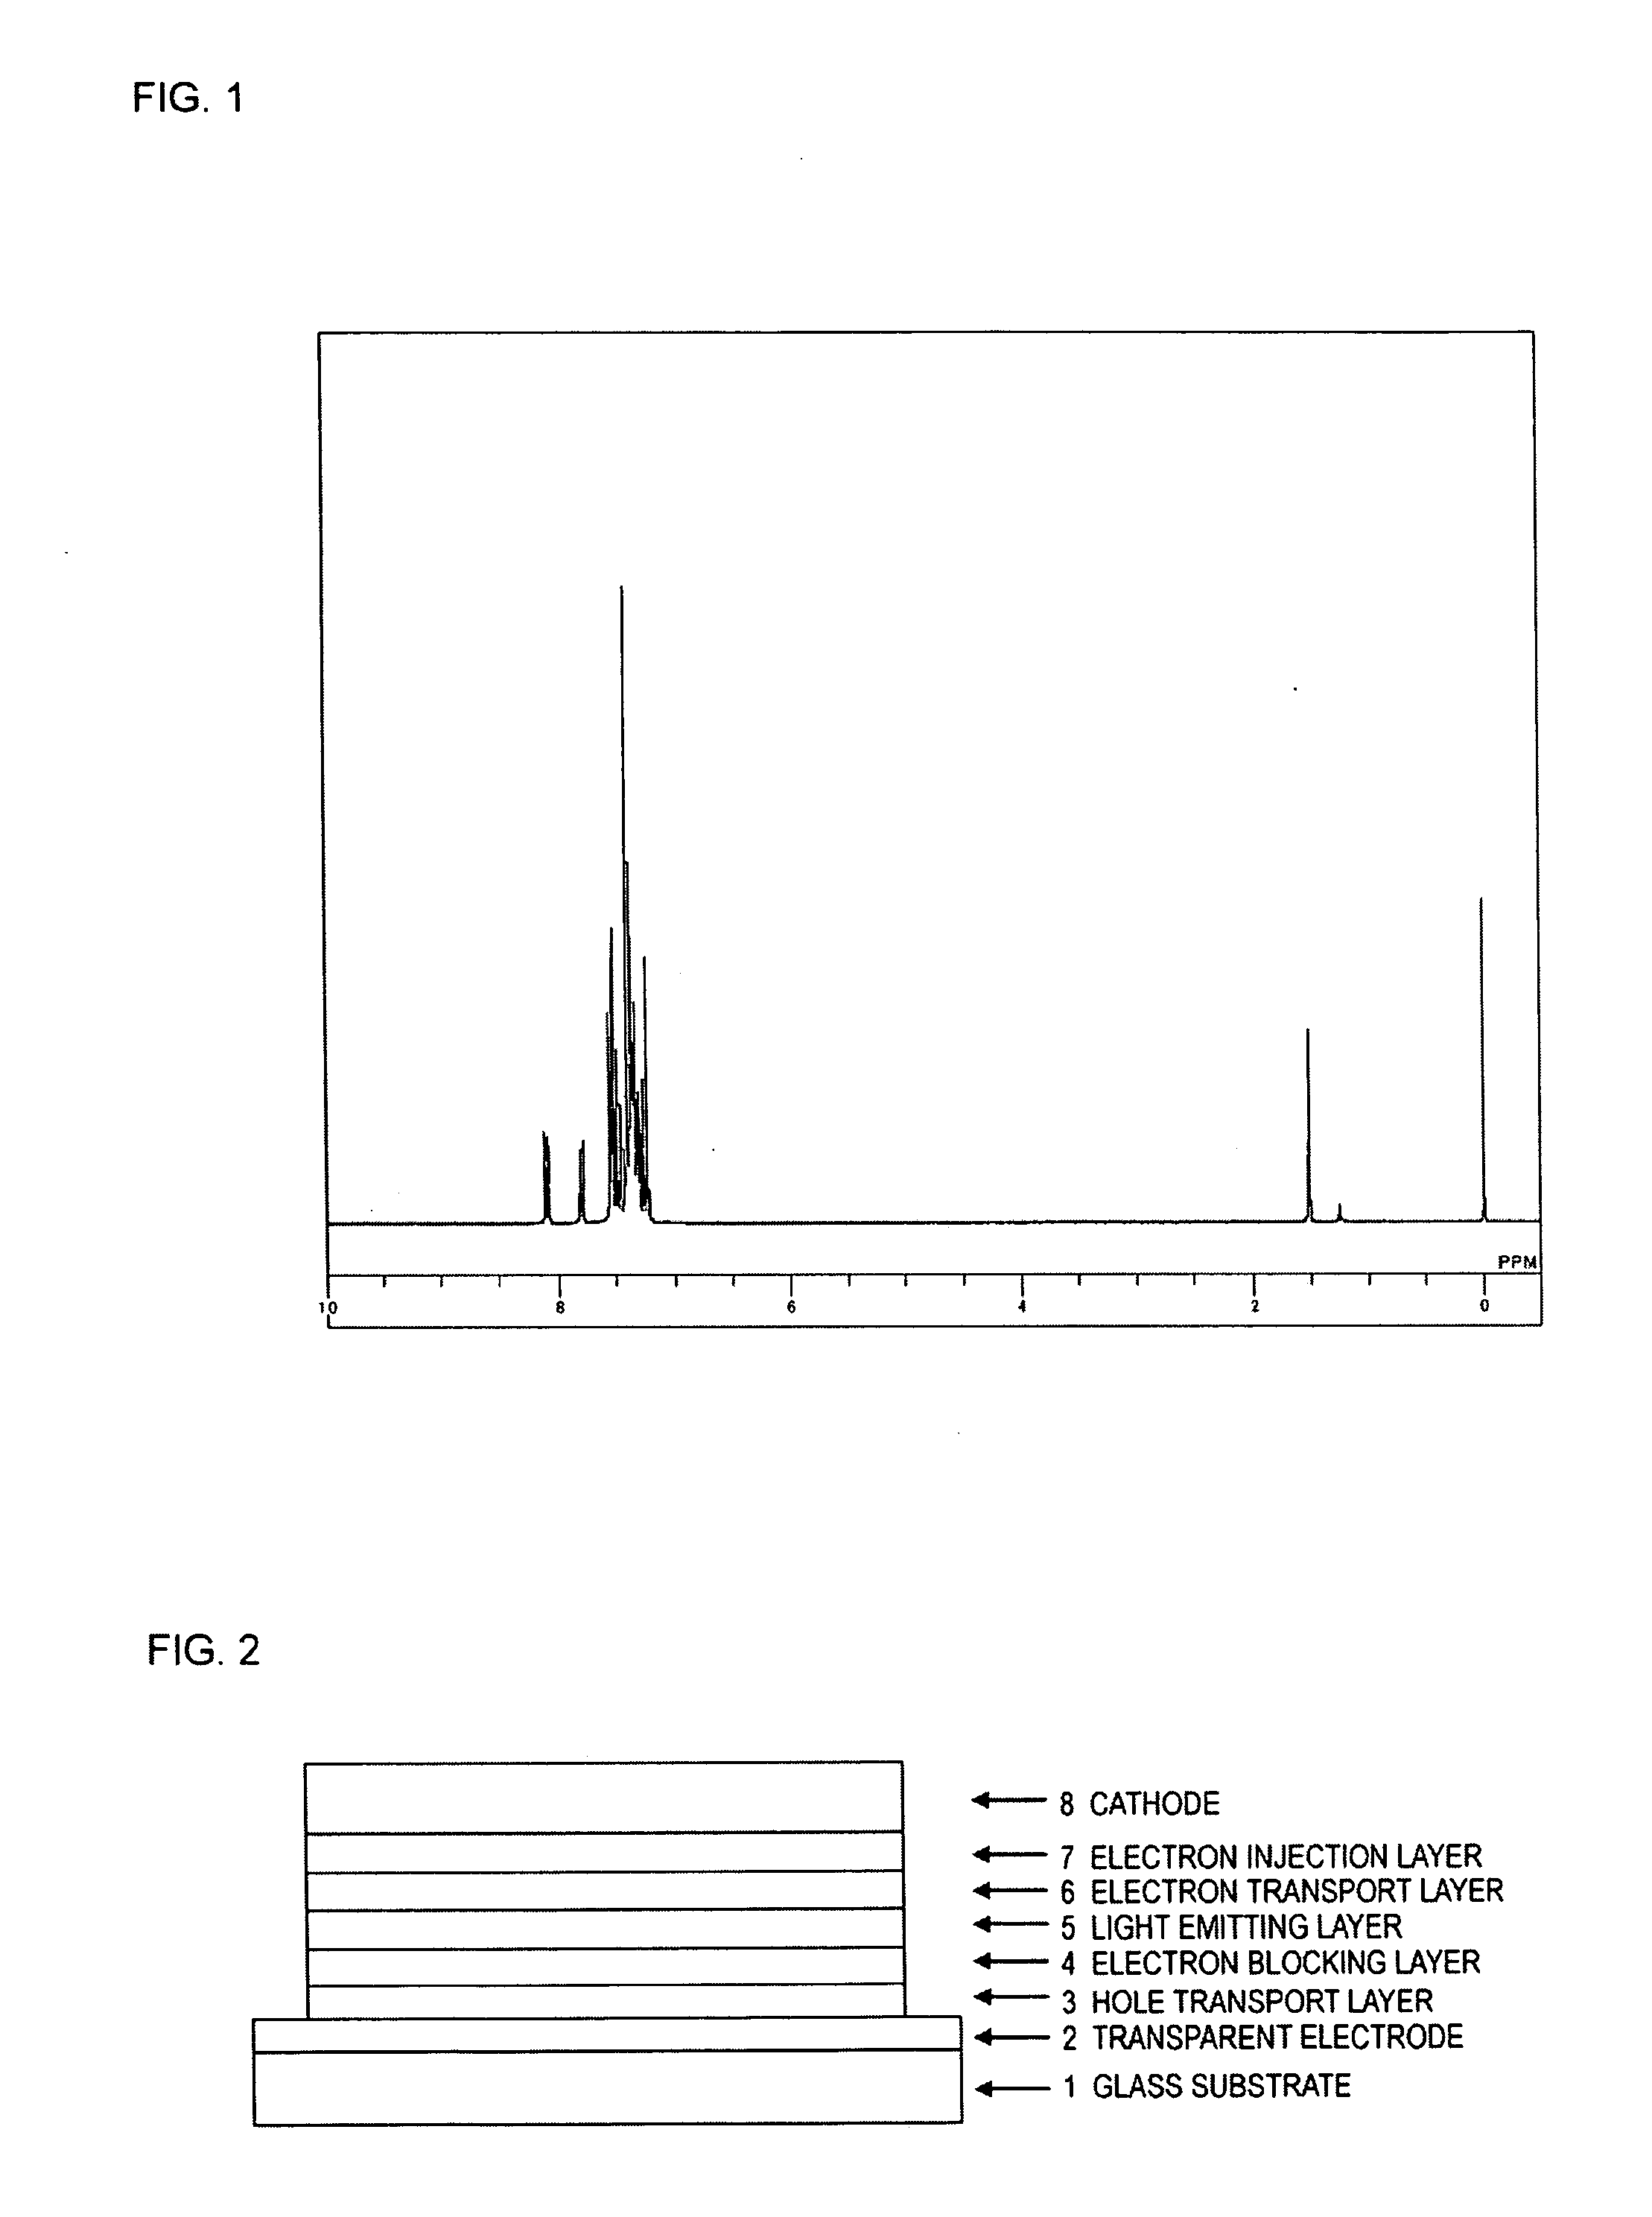 Compound having triphenylsilyl group and triarylamine structure, and organic electroluminescent device